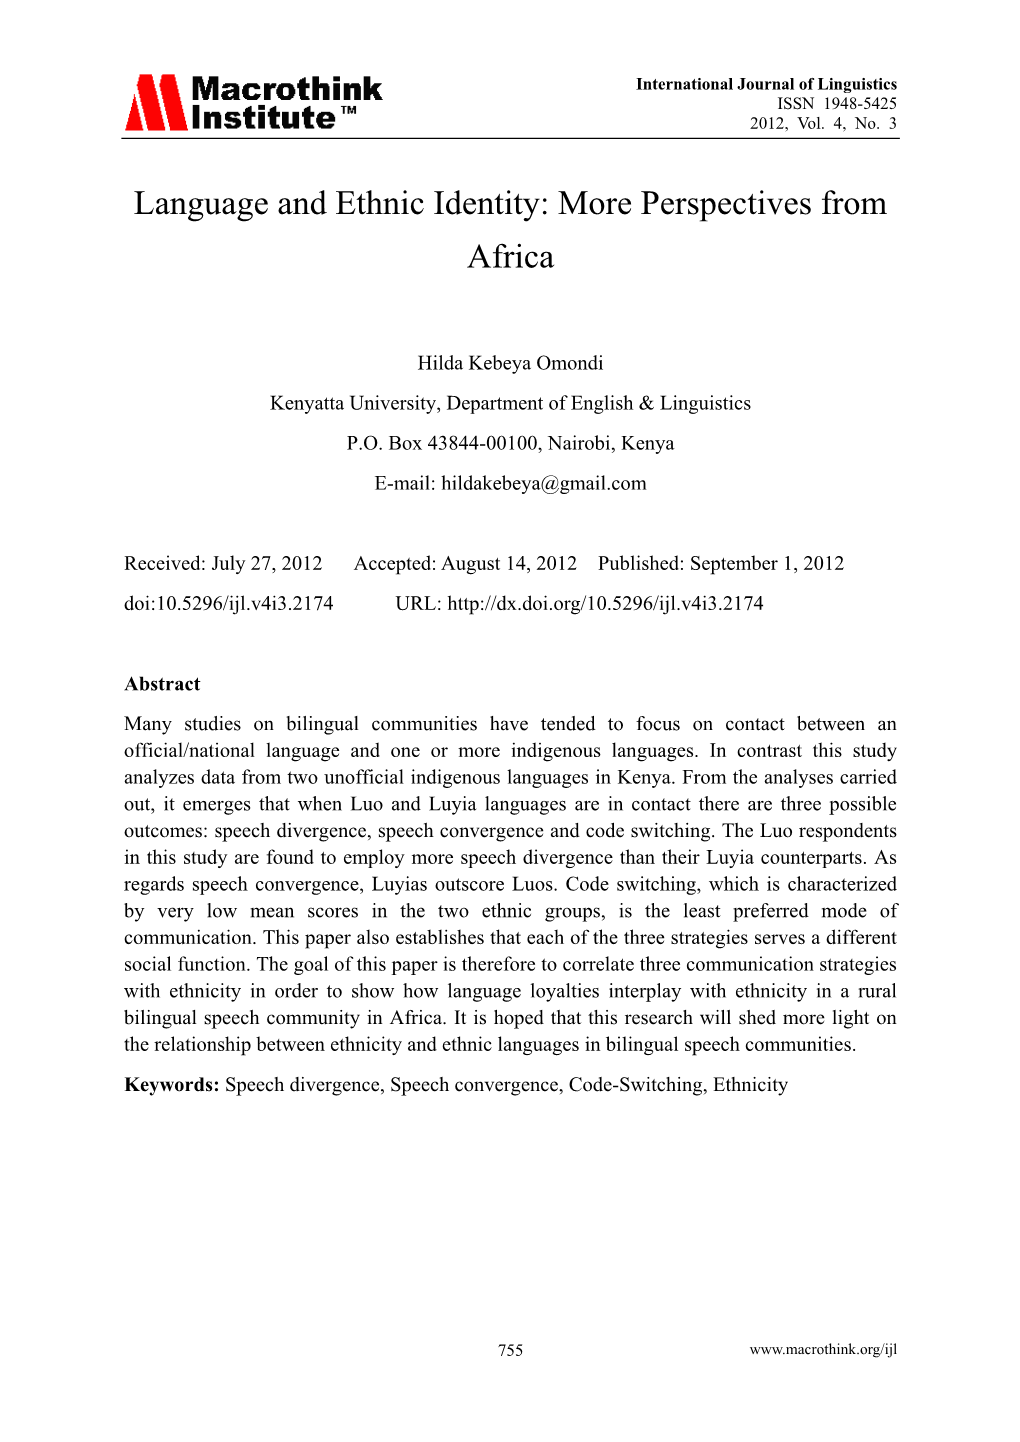 Language and Ethnic Identity: More Perspectives from Africa